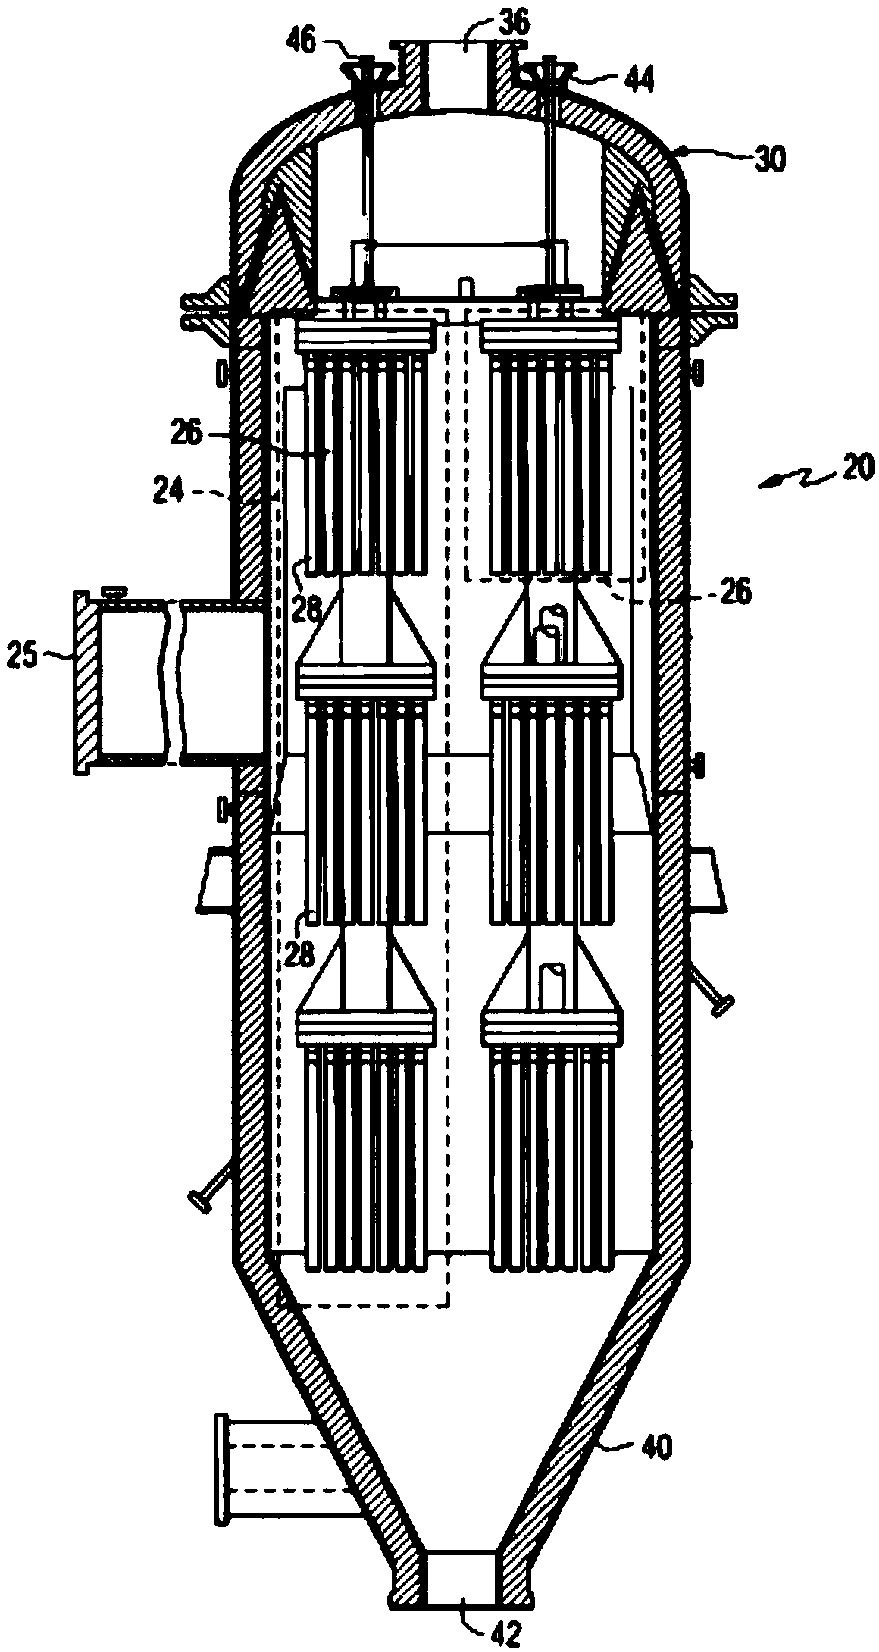 Cartridge filters for gas filtration in gas turbines